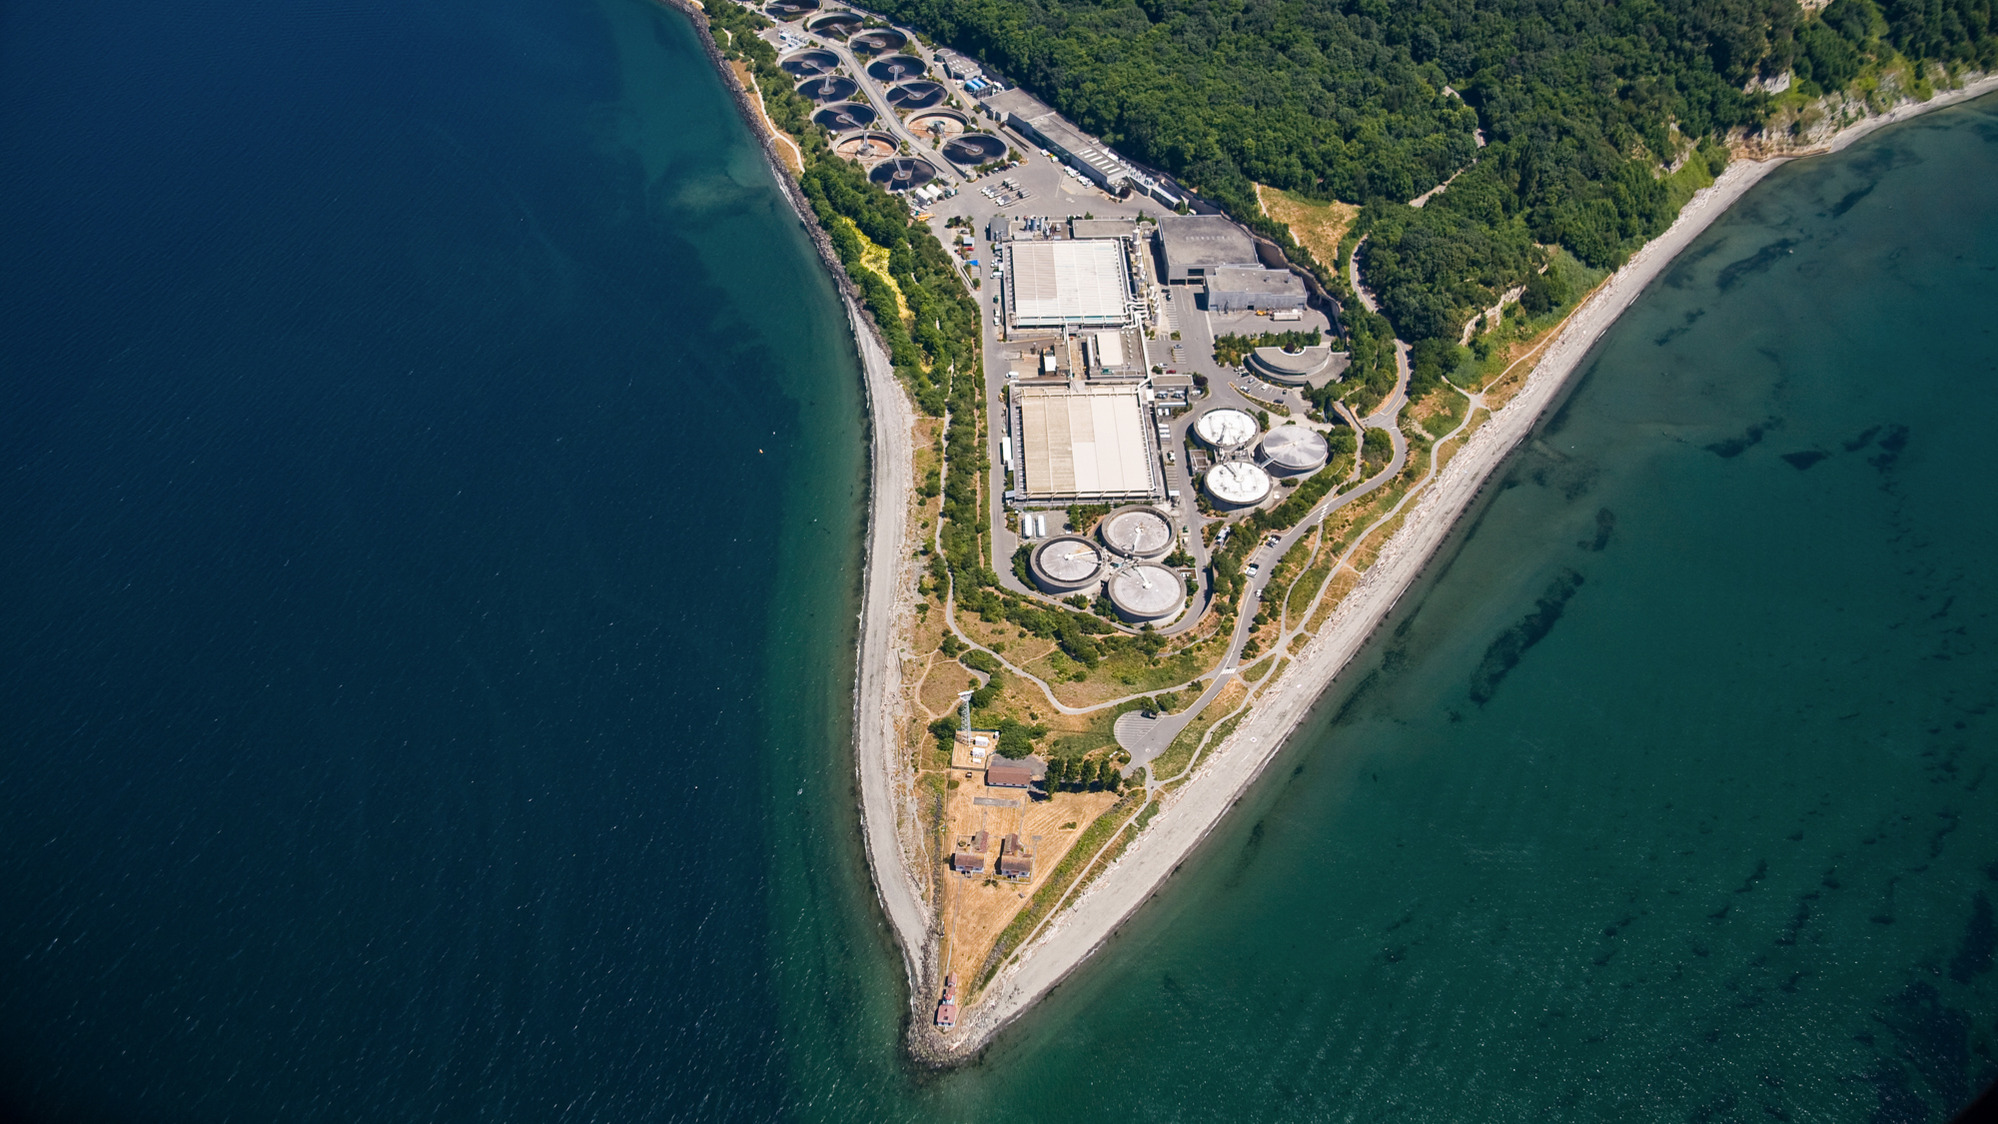 Aerial view of a West Point Treatment Plant located on a narrow strip of land between a body of water and a forested Discovery Park.